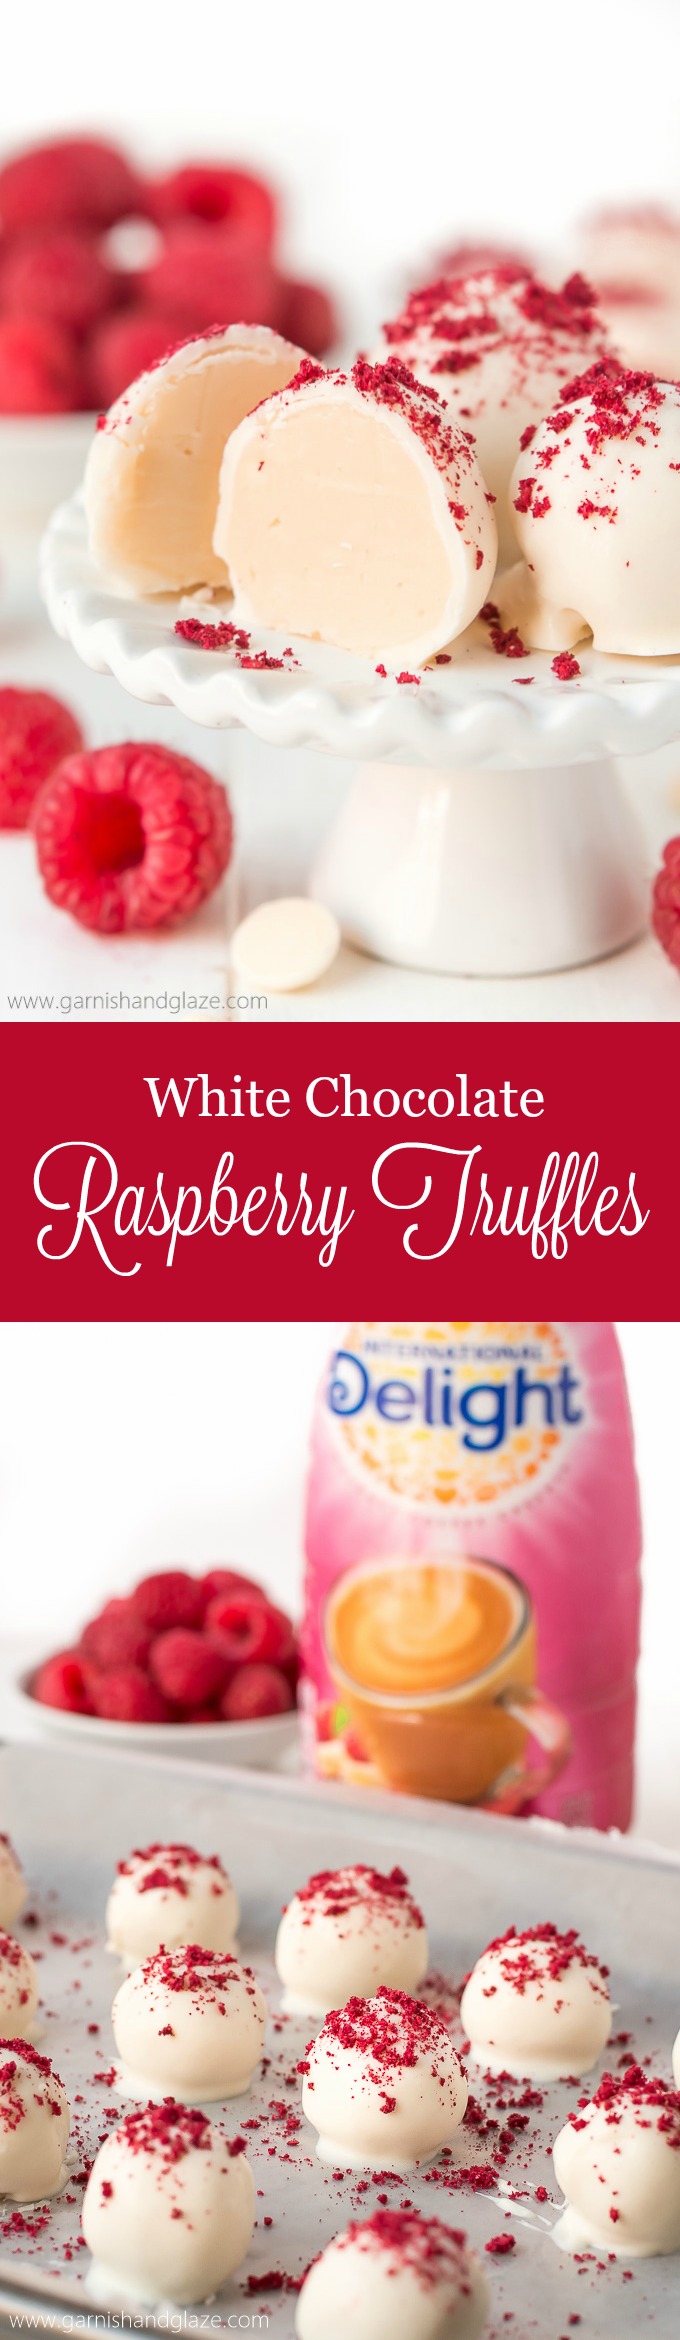 With just 5 ingredients, make the most amazing melt-in-your-mouth White Chocolate Raspberry Truffles to delight in this holiday season. @InDelight #HolidayDelight #IDelight